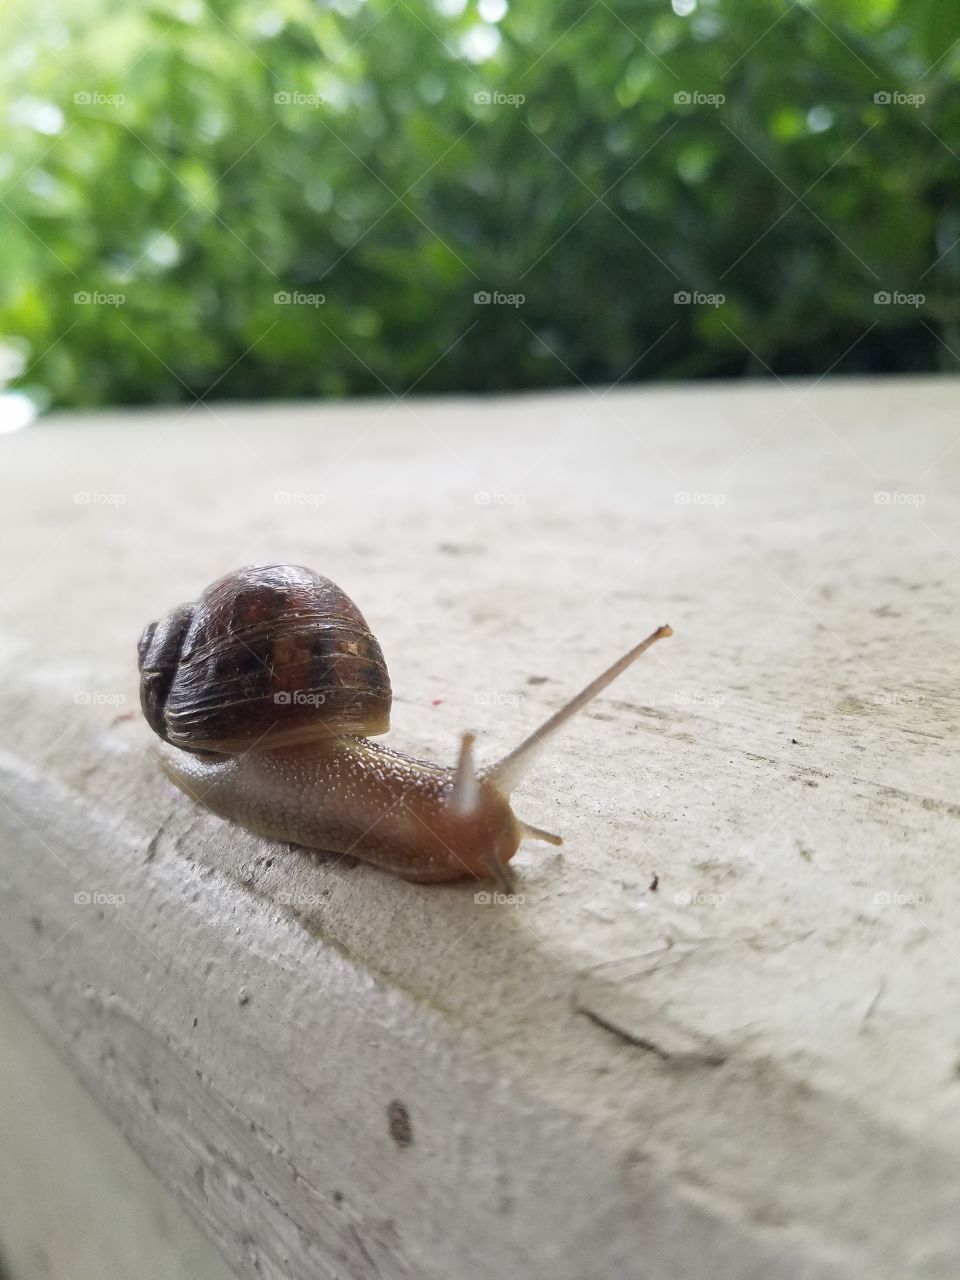 How slow can you go? He's sneaking around my porch!